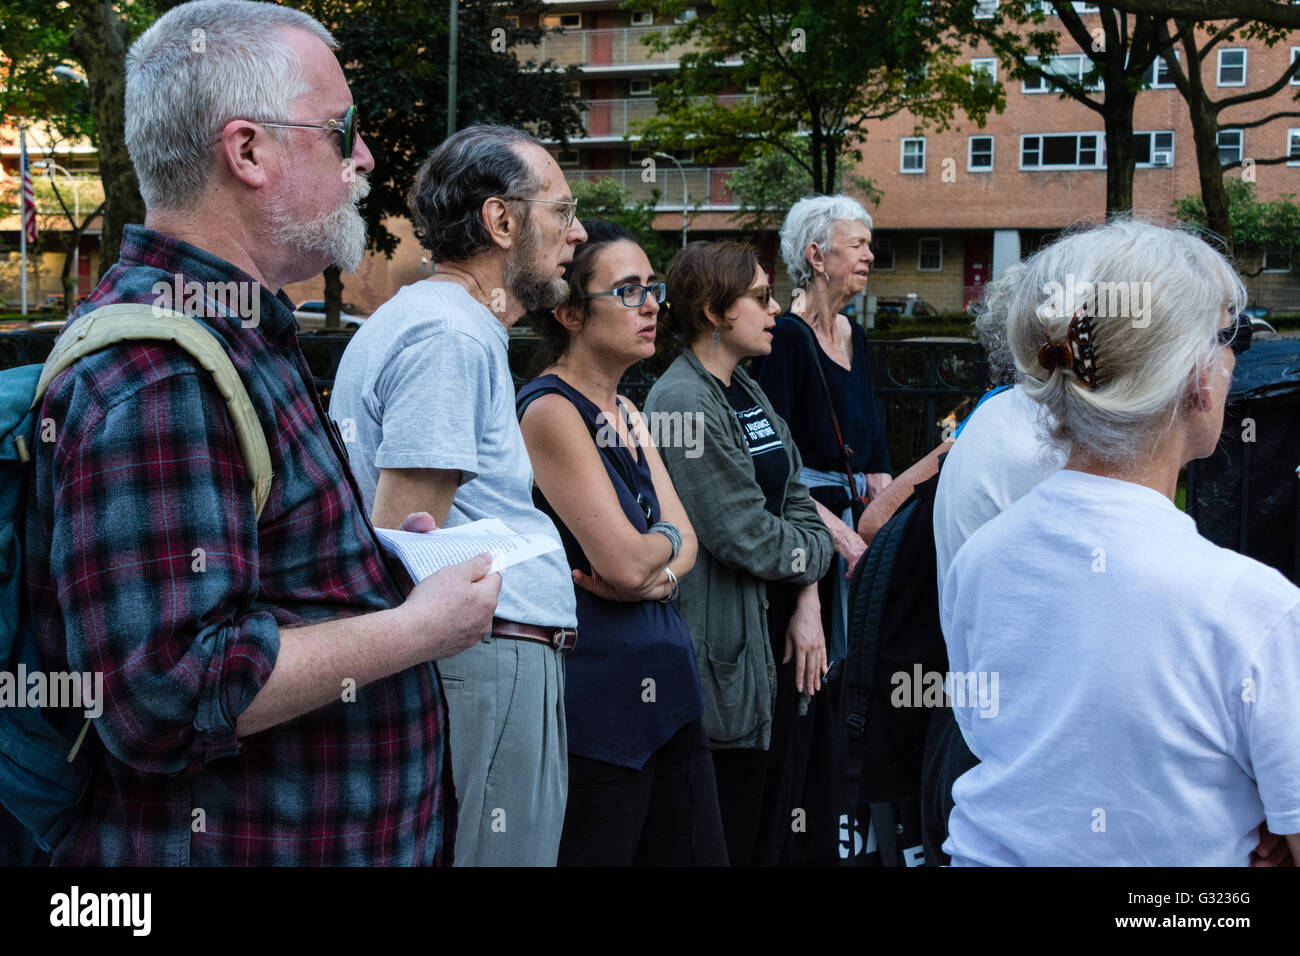 New York, USA. 6th June 2016. Activists sing to inmates accused of terrorism in NYC jail during vigil. Prison rights advocates of the No Separate Justice campaign held a vigil at New York's Metropolitan Correctional Center charging human rights violations and abusive treatment of terror suspects held in such facilities. Credit:  M. Stan Reaves/Alamy Live News Stock Photo